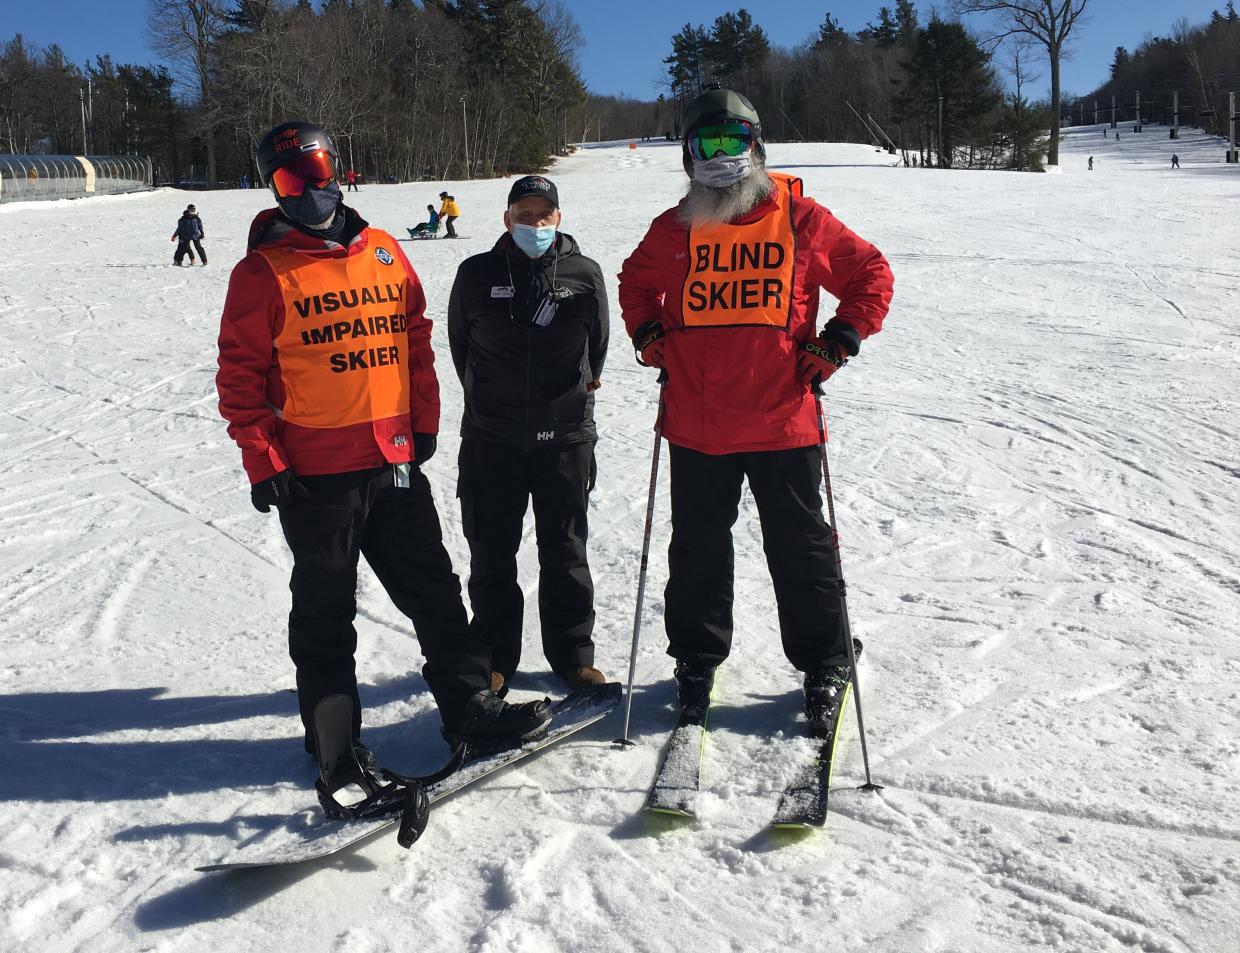 Three skiers stand at the bottom of a snowy hill on a sunny day. One skier has a vest that says visually impaired skier. Another has a vest that says blind skier.